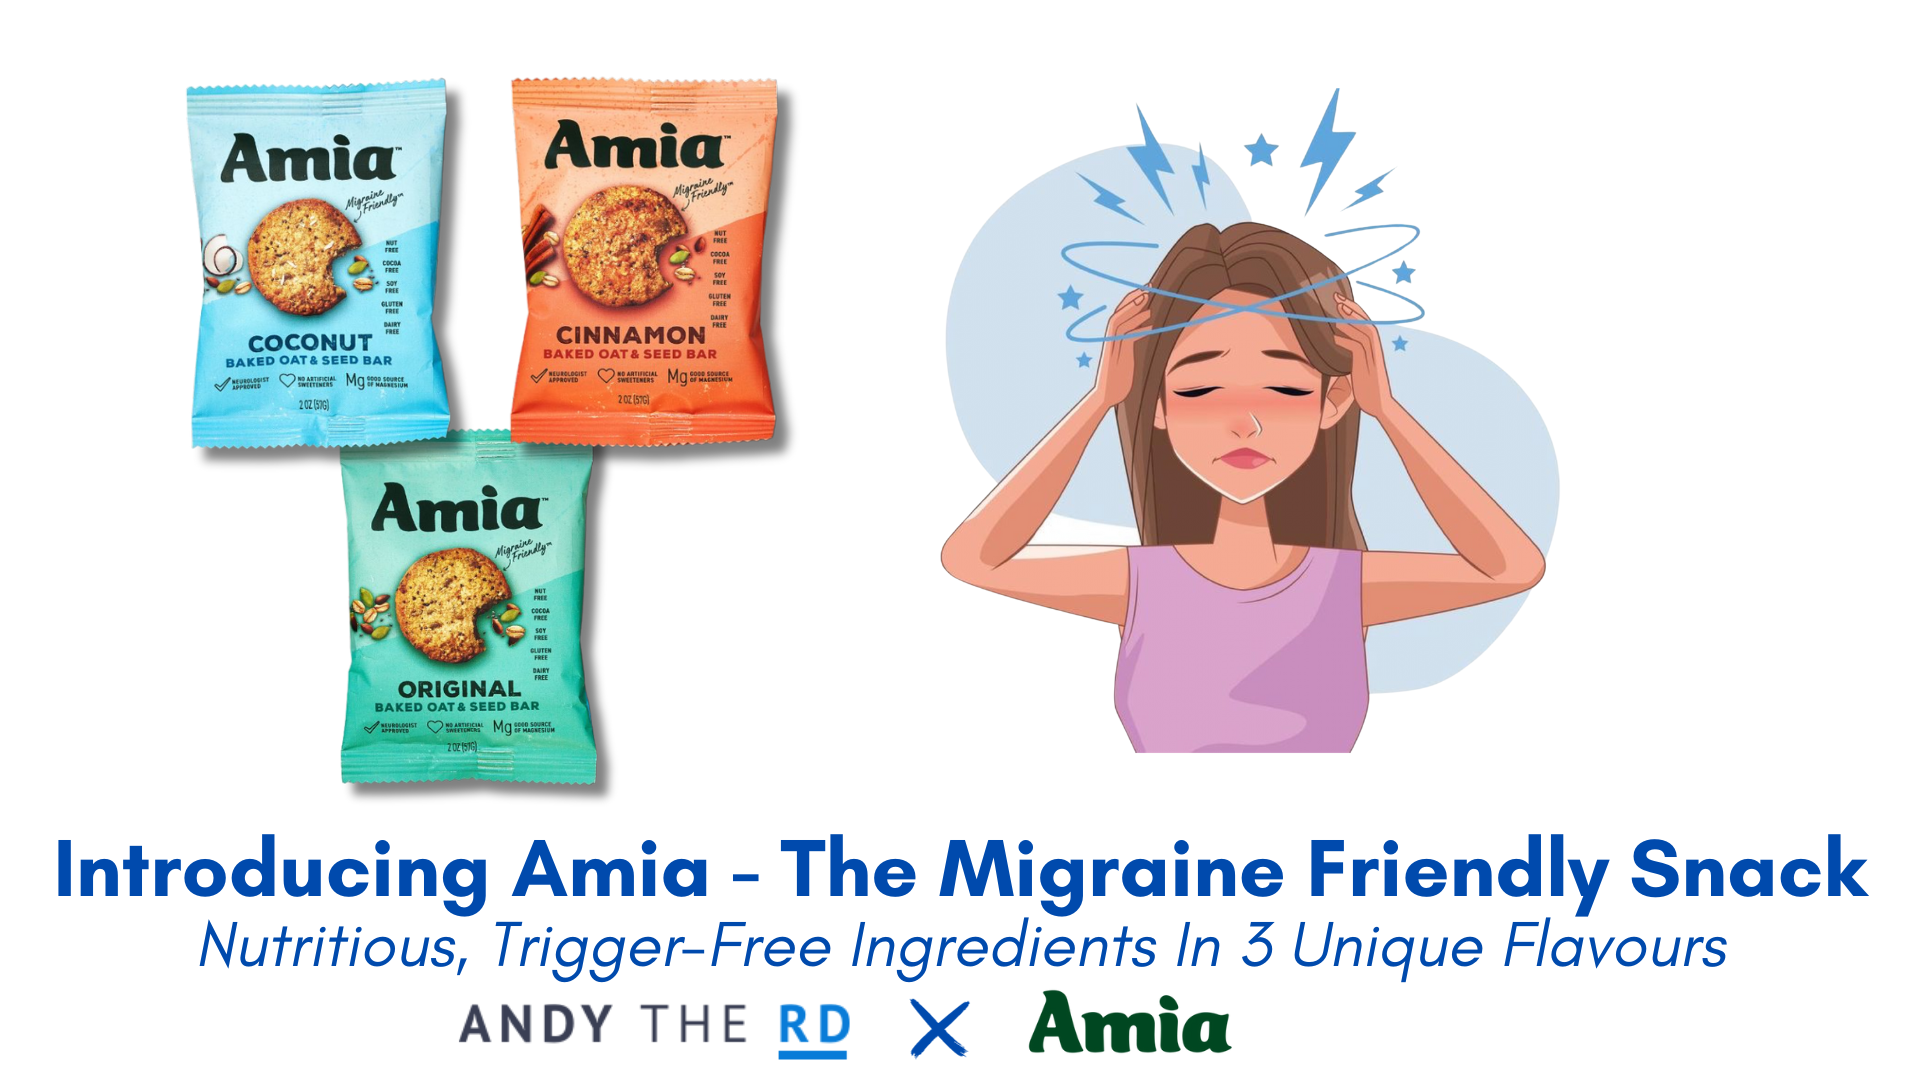 Introducing AMIA – The Snack For Migraine Sufferers